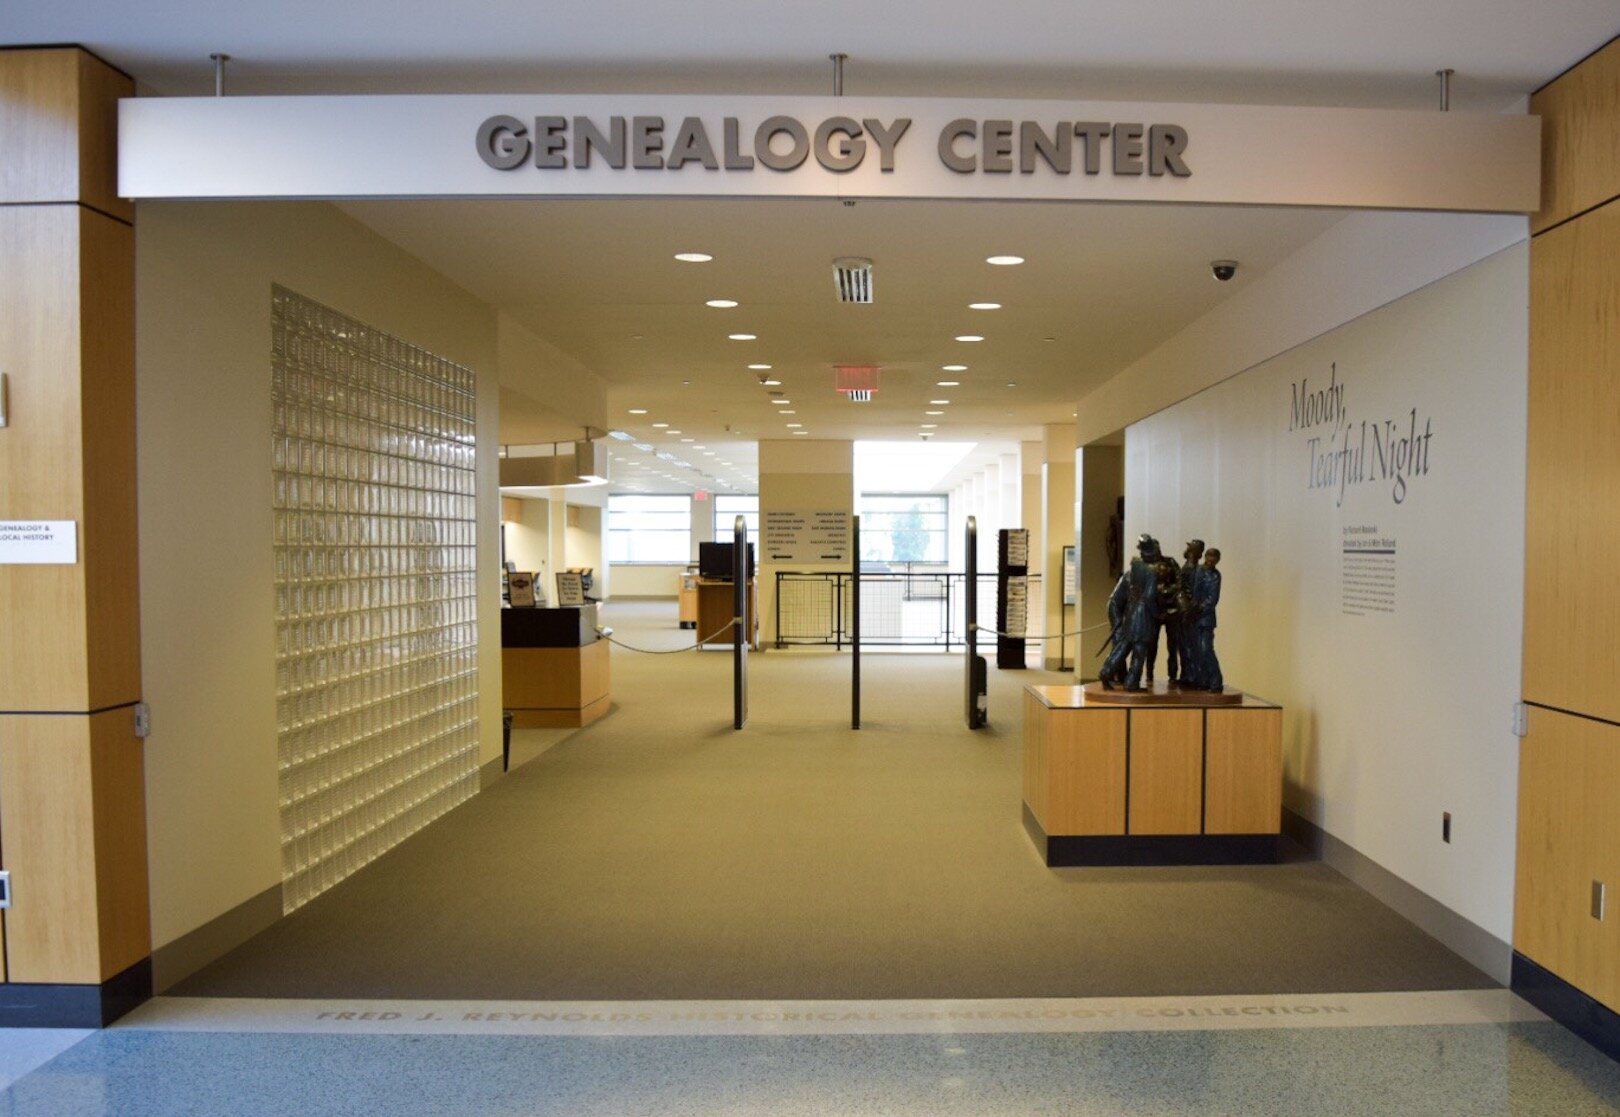 The Genealogy Center at the Allen County Public Library.